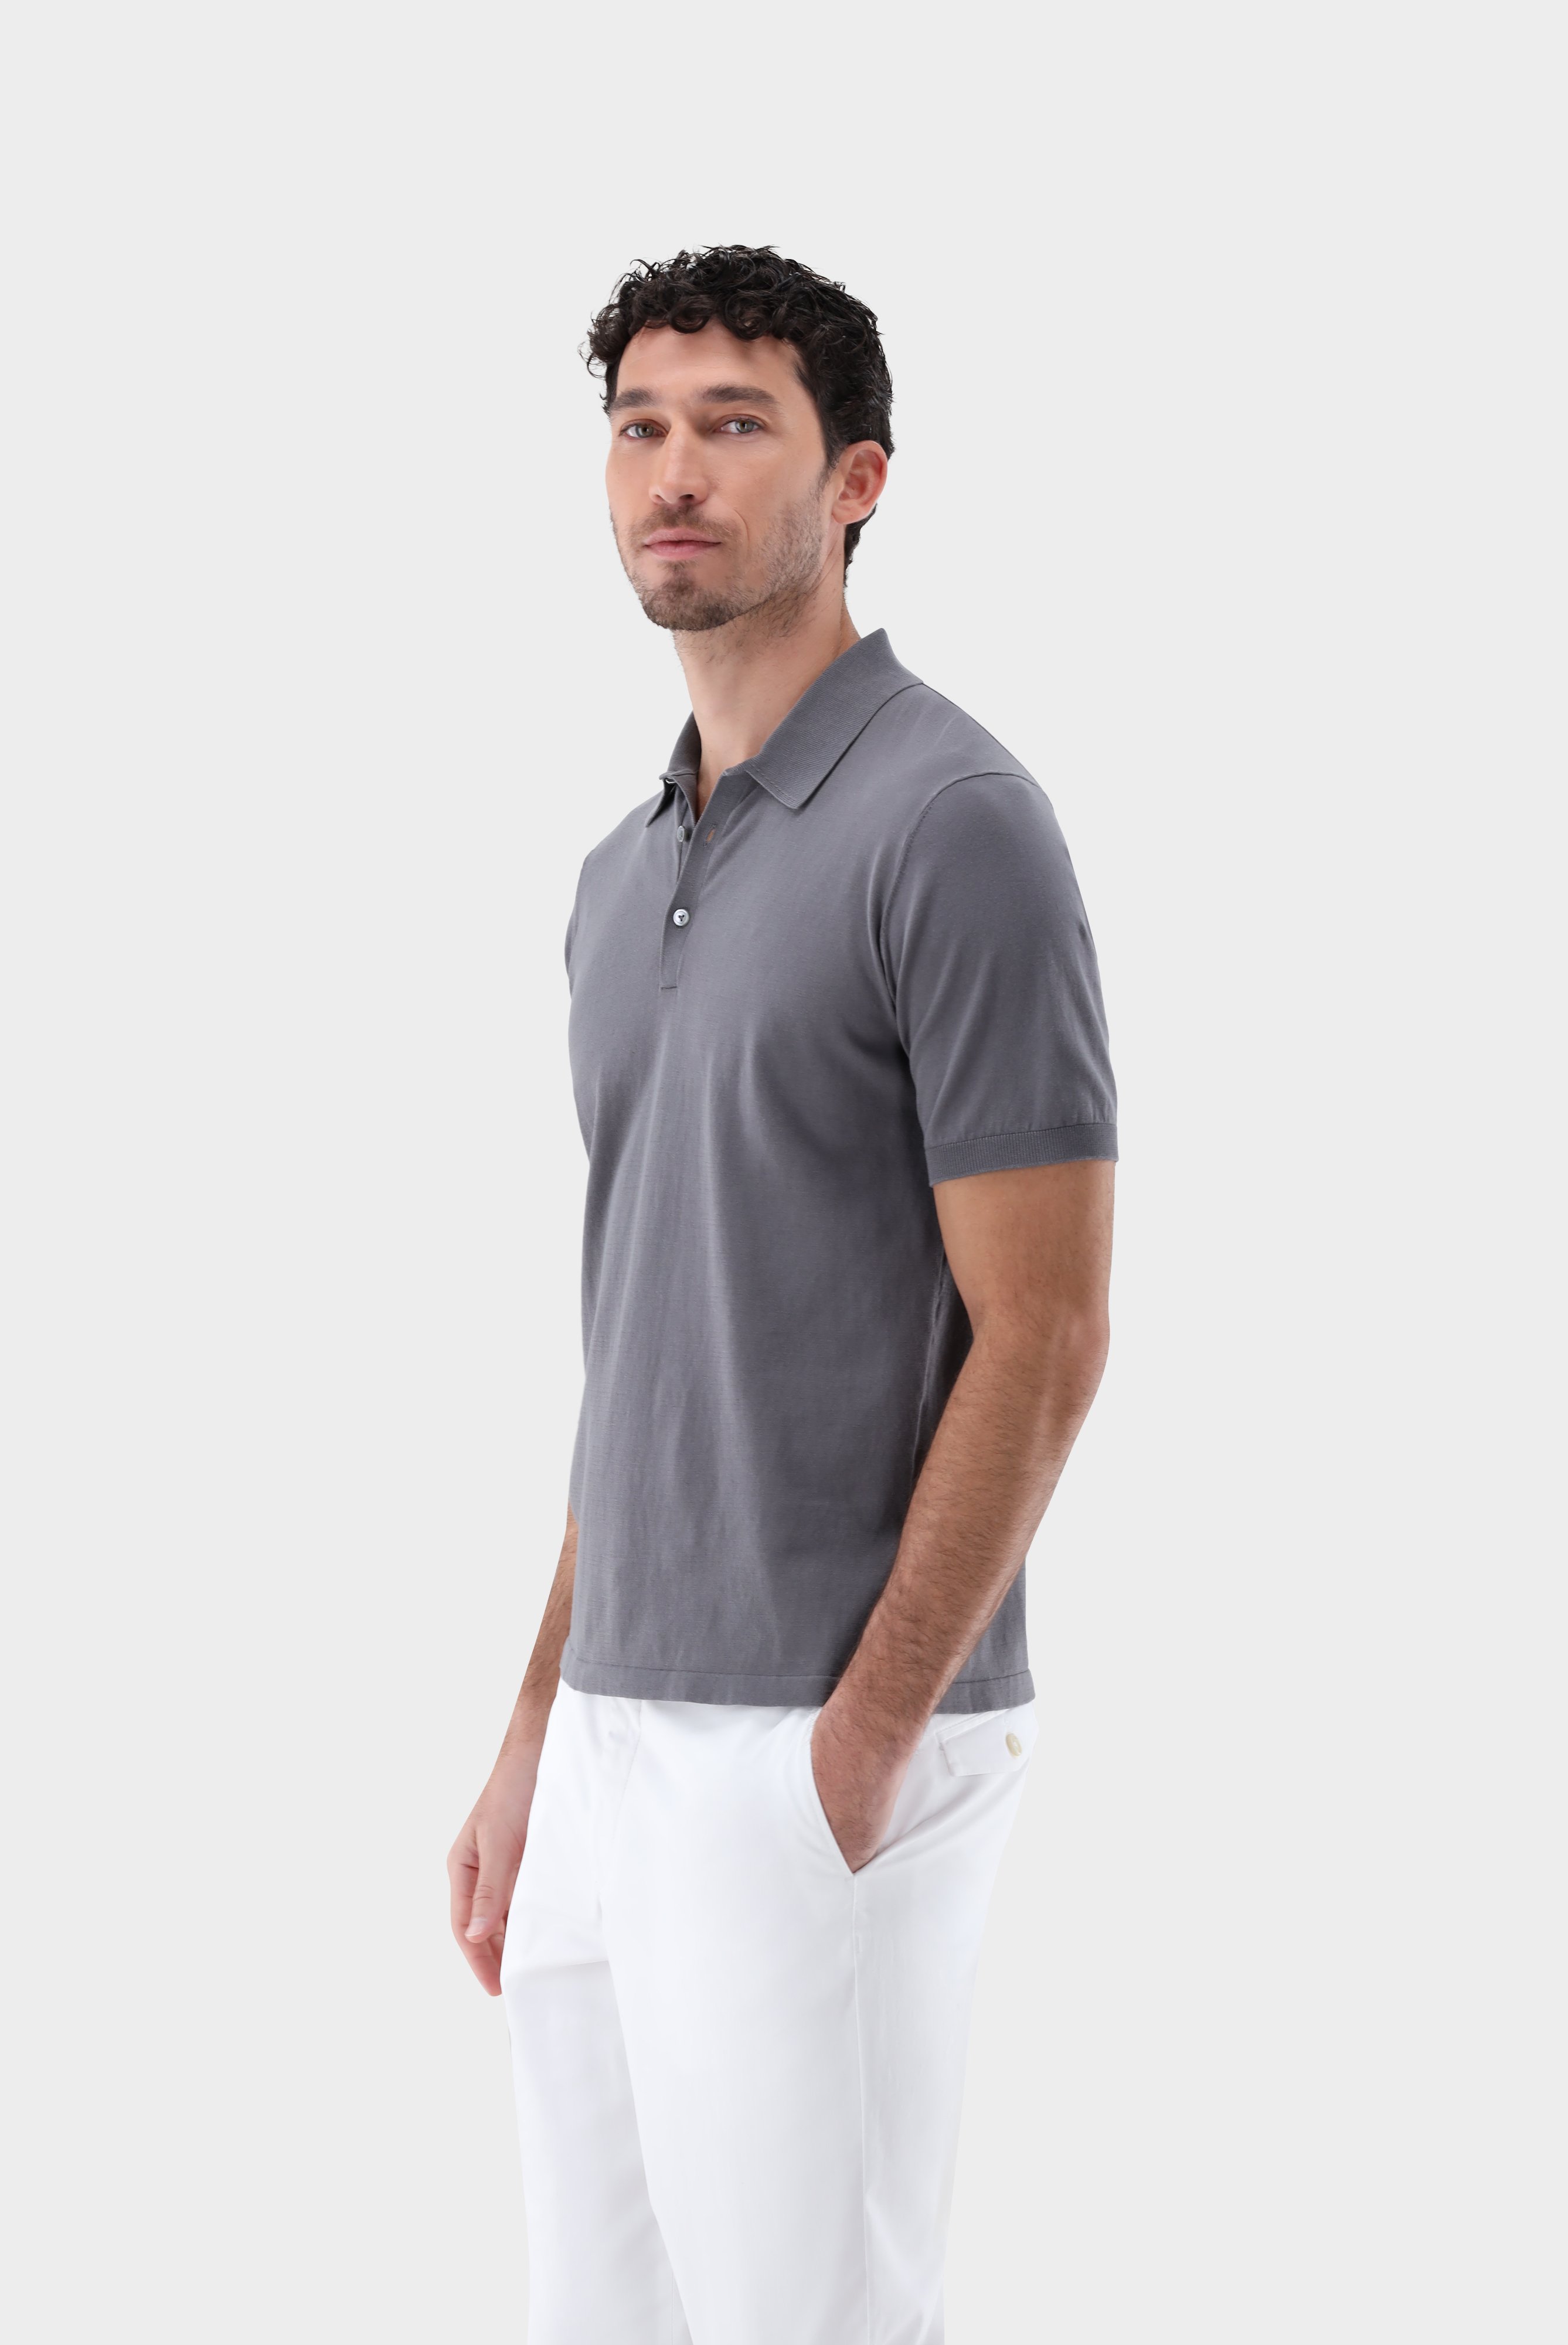 Knit Polo made of Air Cotton